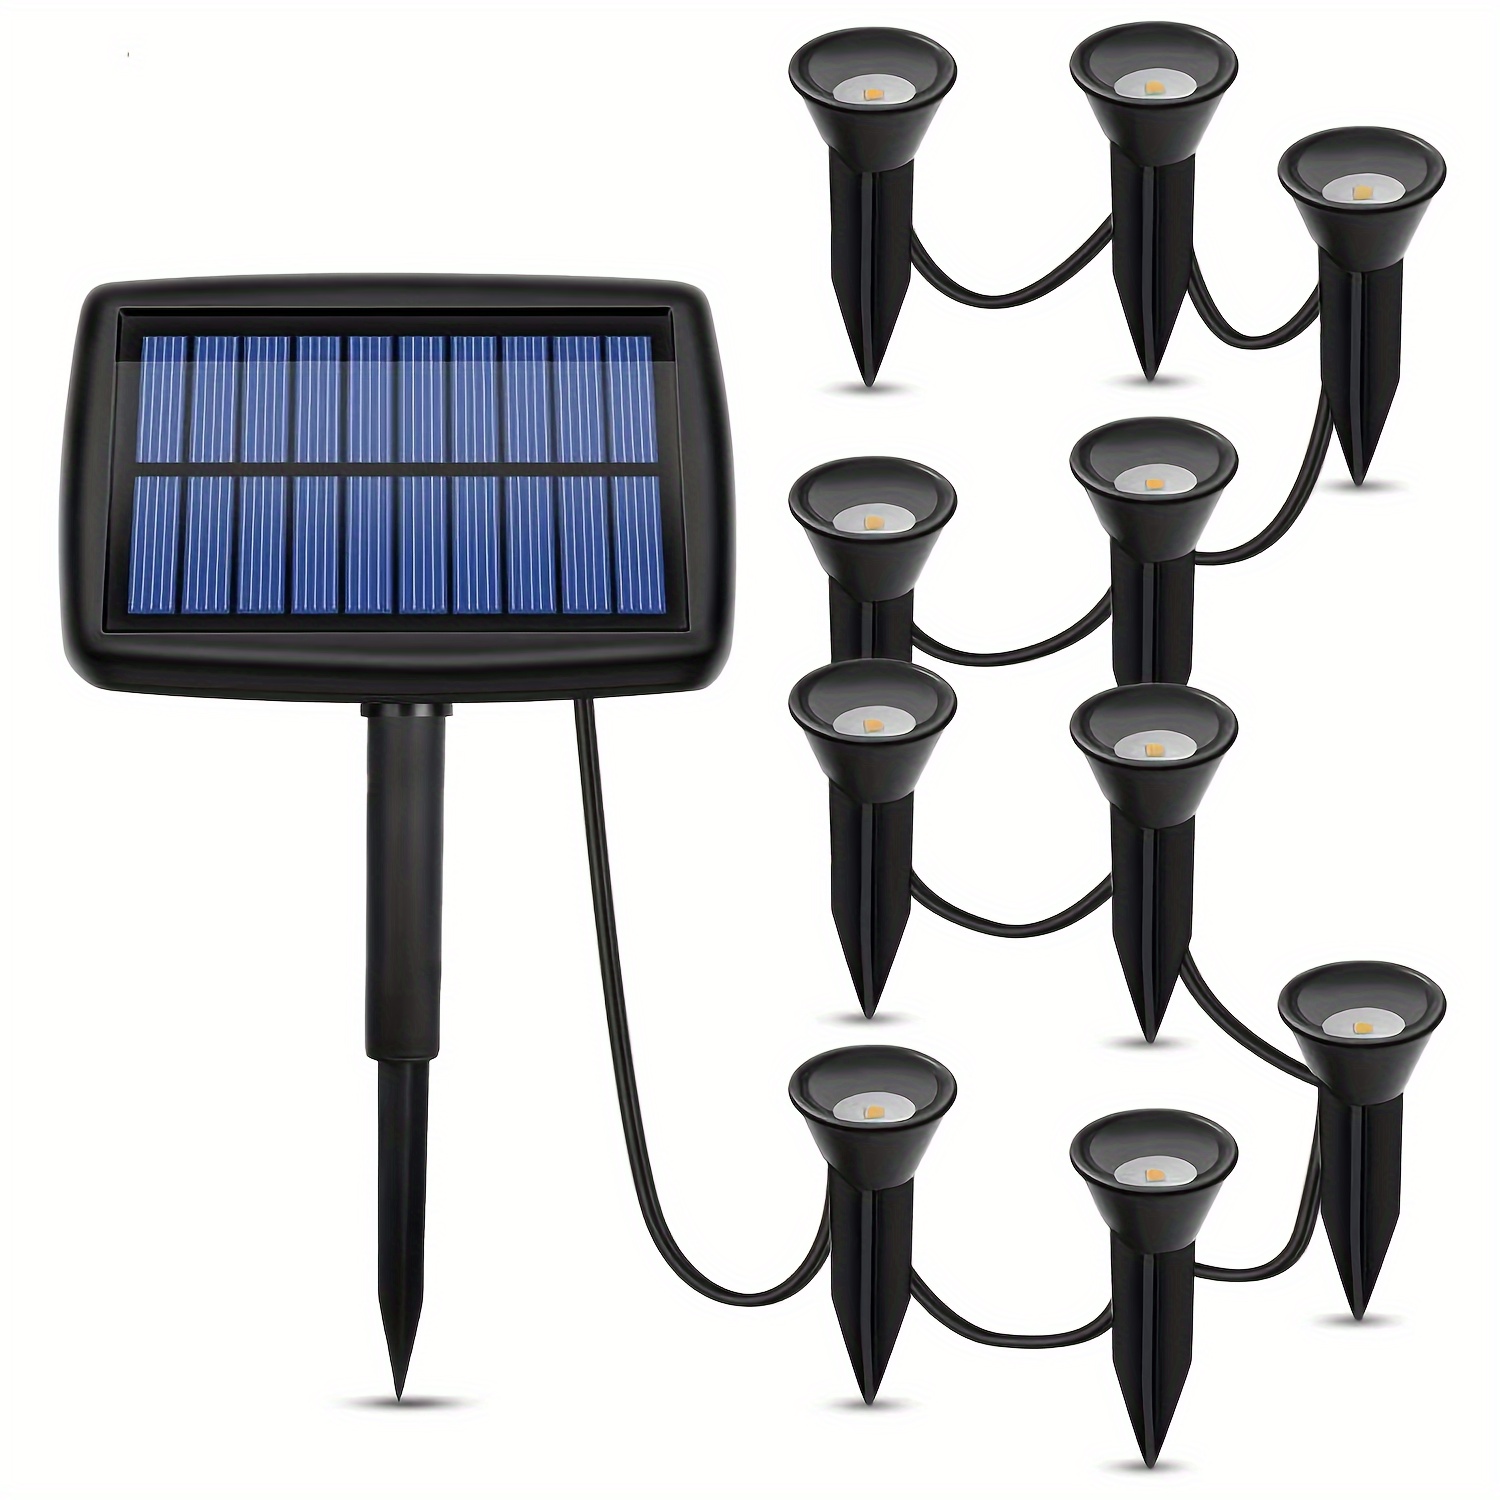 

1 Pack , 10 Led Pathway Lighting, Outdoor Lawn Lamps, Yard Decor, Plastic Landscape Illumination, Solar-powered Patio Lights With Stakes